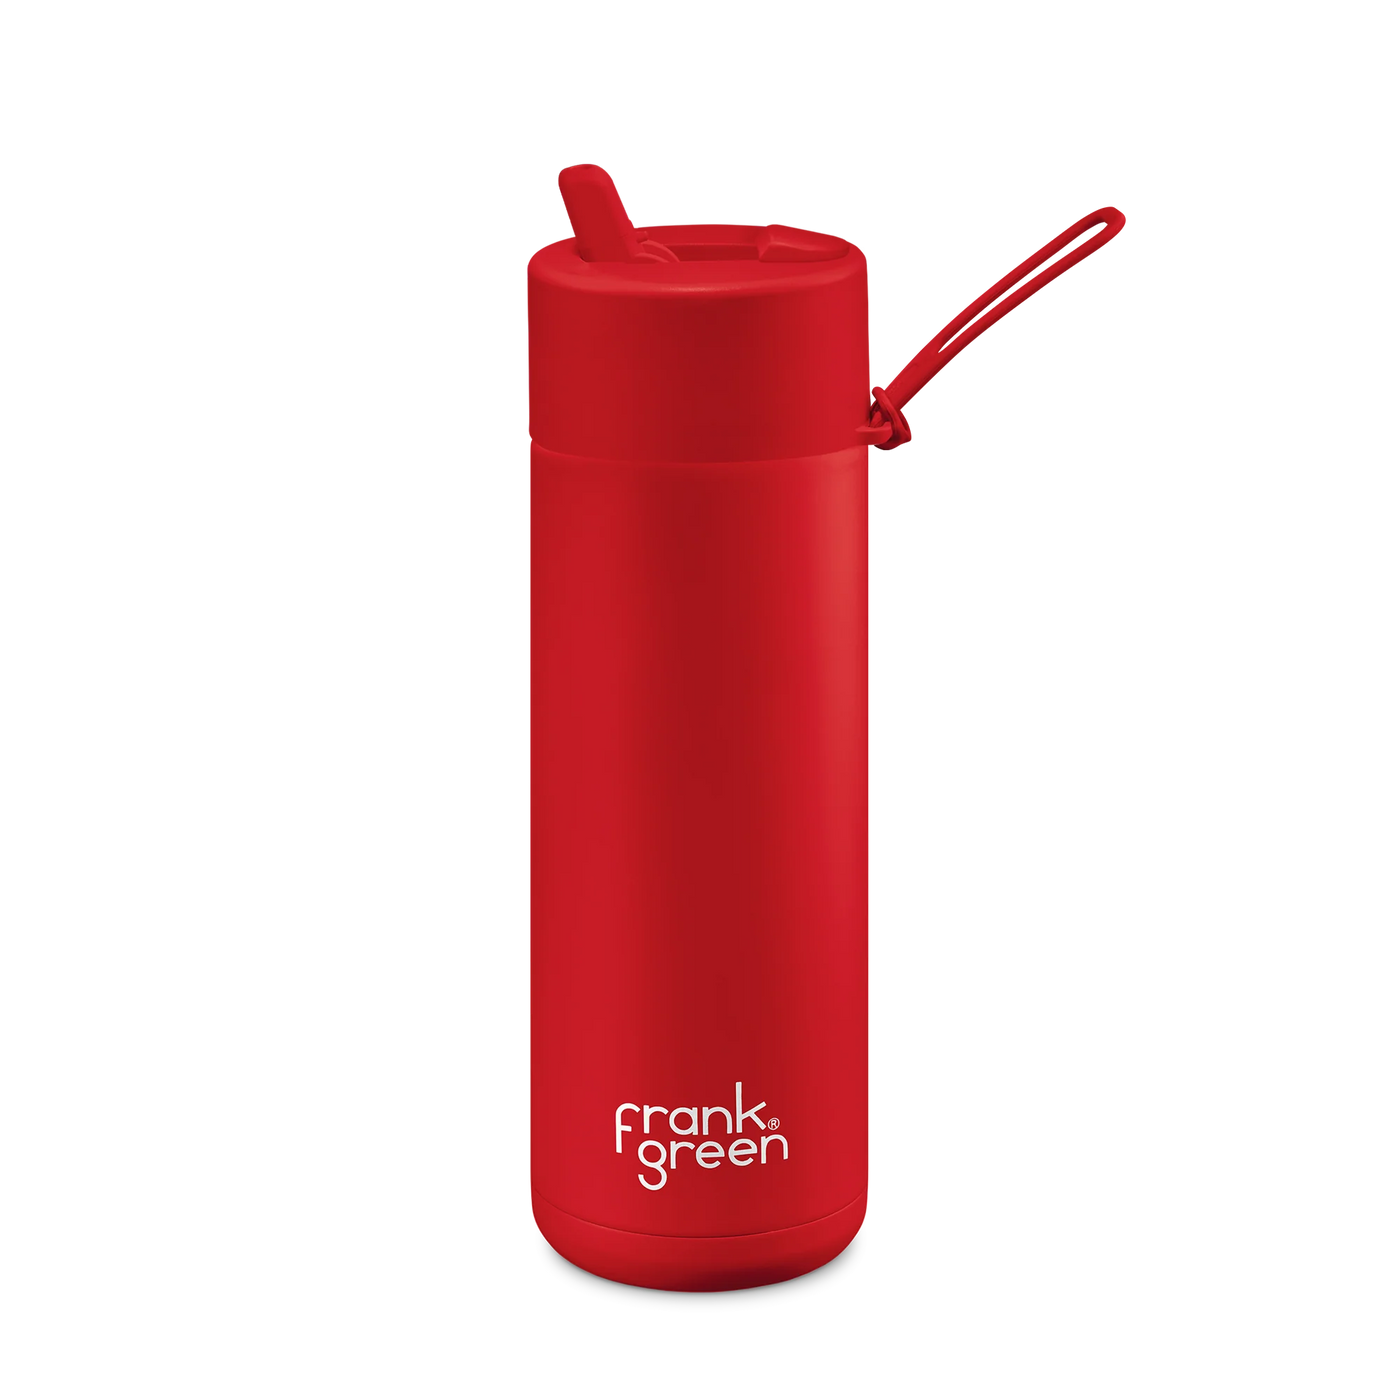 Frank Green Limited Edition Ceramic Reusable Bottle 20oz/595ML - Atomic Red Mealtime Frank Green 